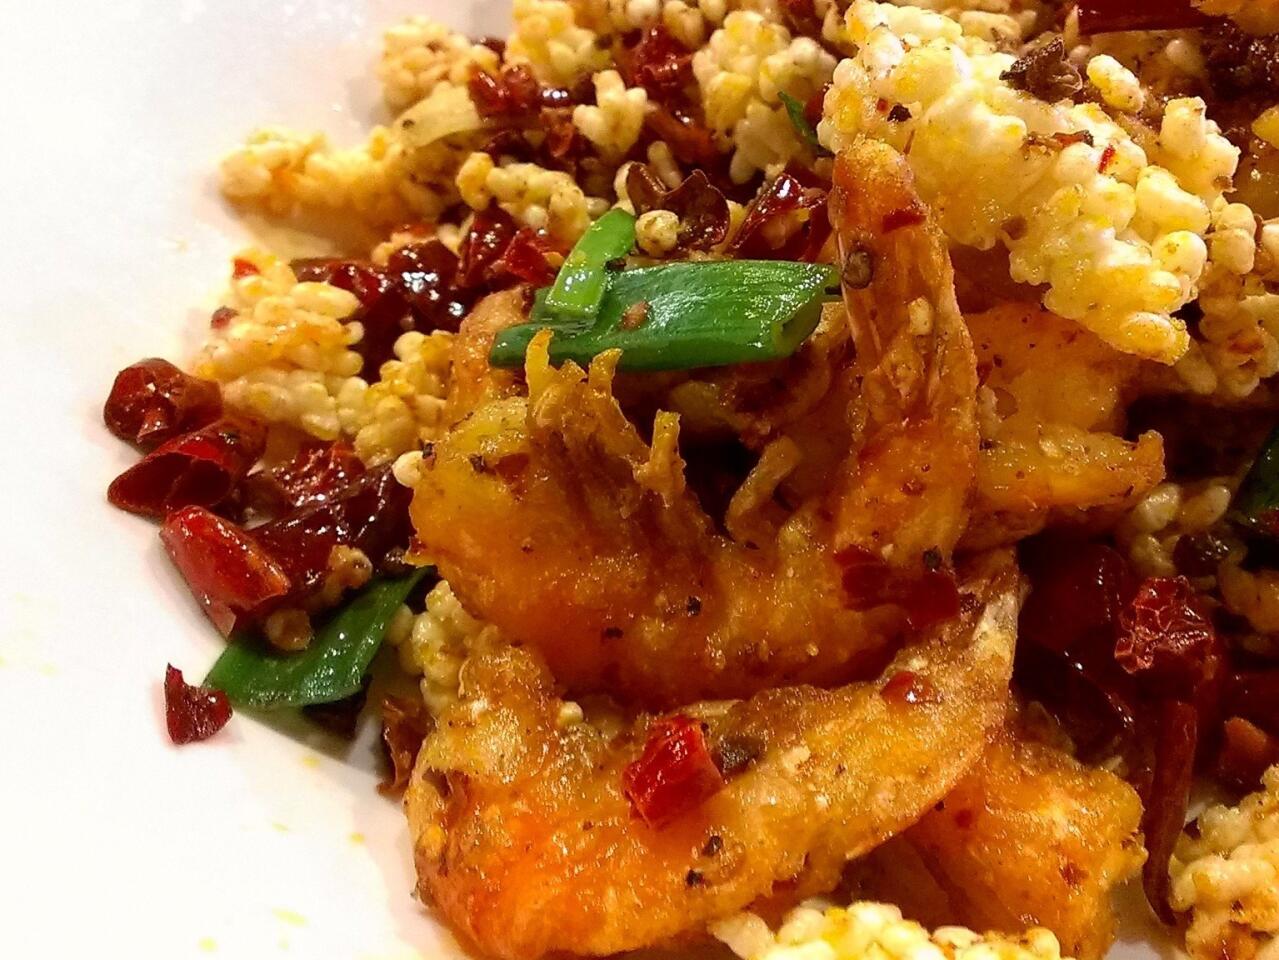 The spicy shrimp with sizzling rice at Chengdu Taste is a platter of deep-fried shrimp with clusters of puffed rice, green onions, chiles and garlic.